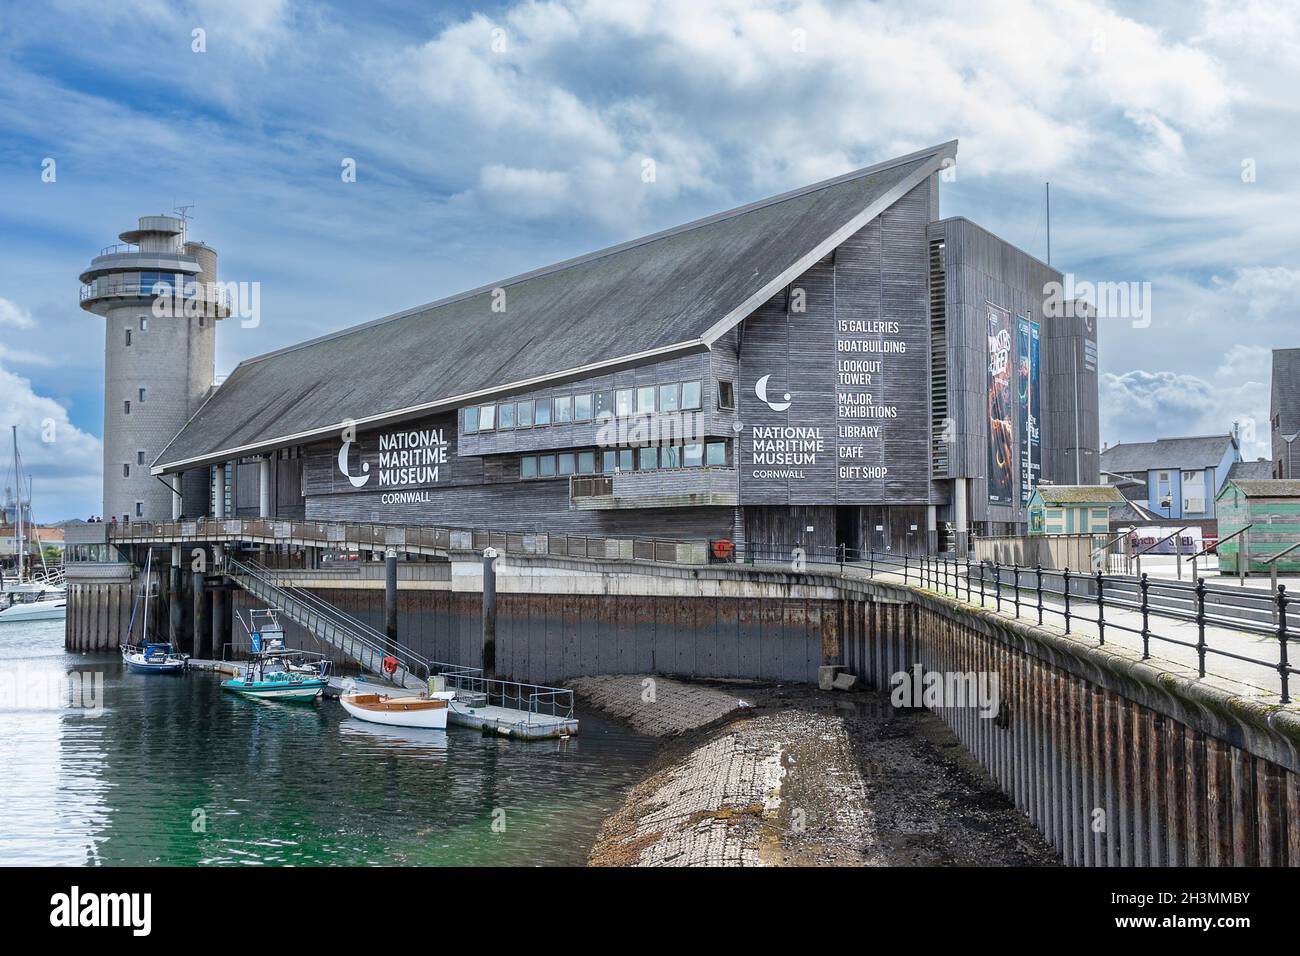 National Maritime Museum in Falmouth Stock Photo